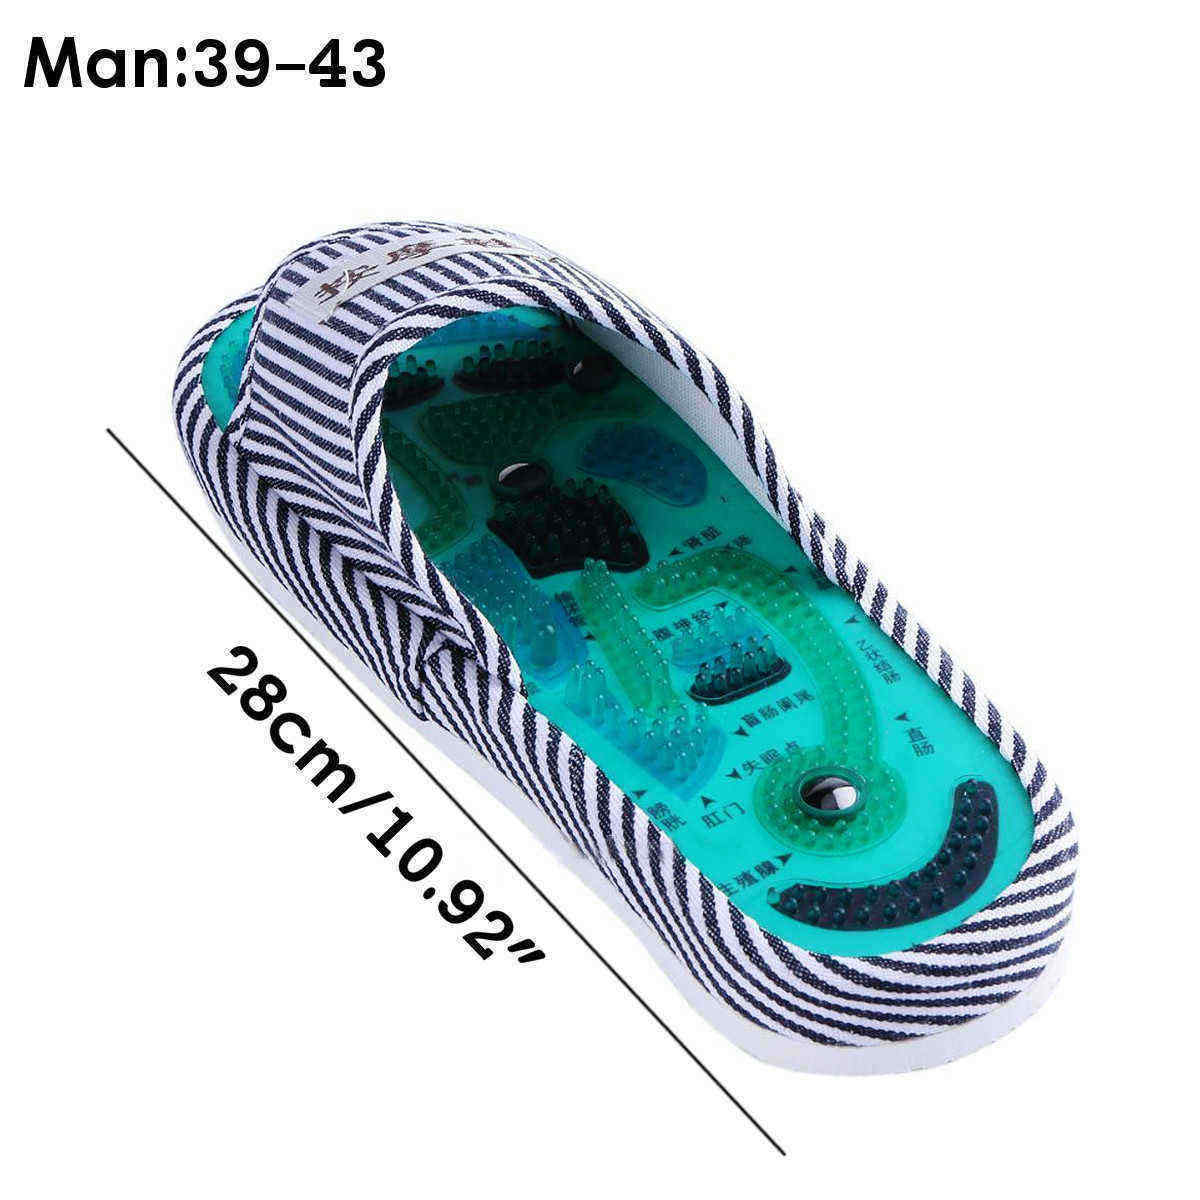 1-Pair-Foot-Massage-Slipper-Health-Feet-Care-Shoes-Sandals-Magnetic-Pad-Acupuncture-1432608